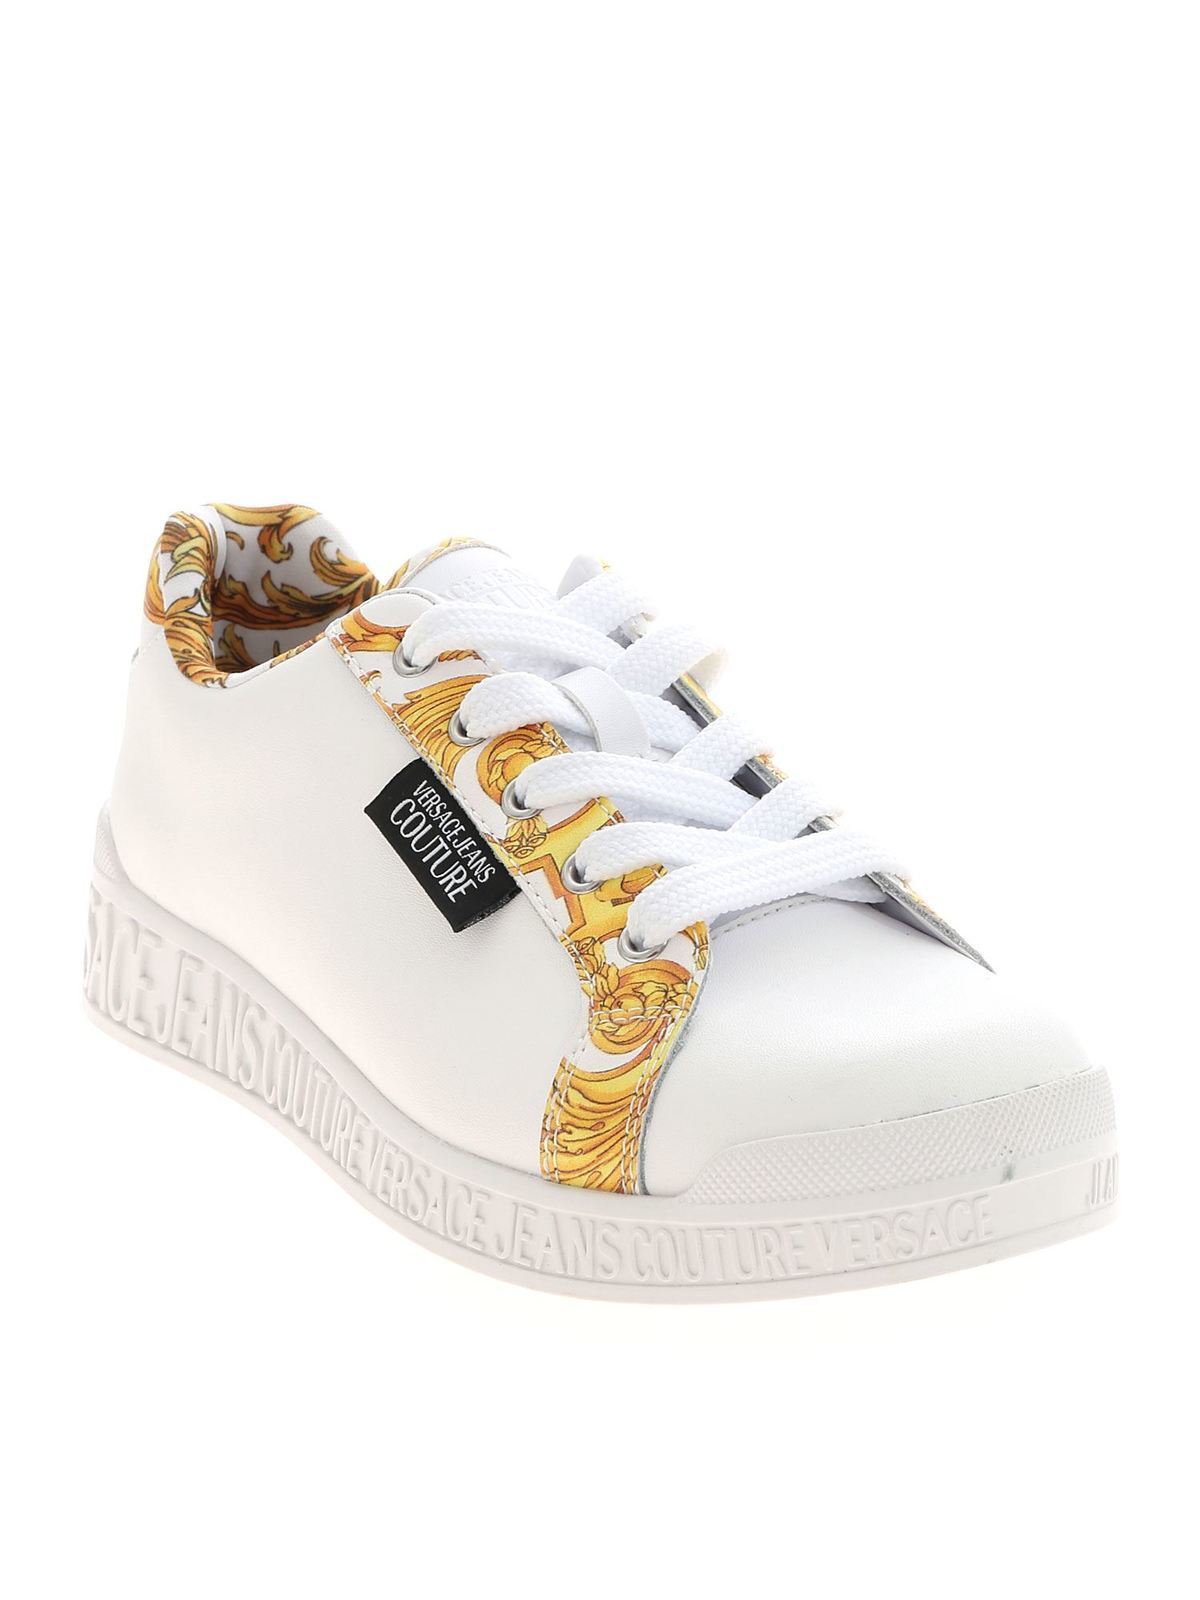 Versace Jeans Couture Denim Sneakers in White/Silver - Save 26% White Womens Trainers Versace Jeans Couture Trainers 